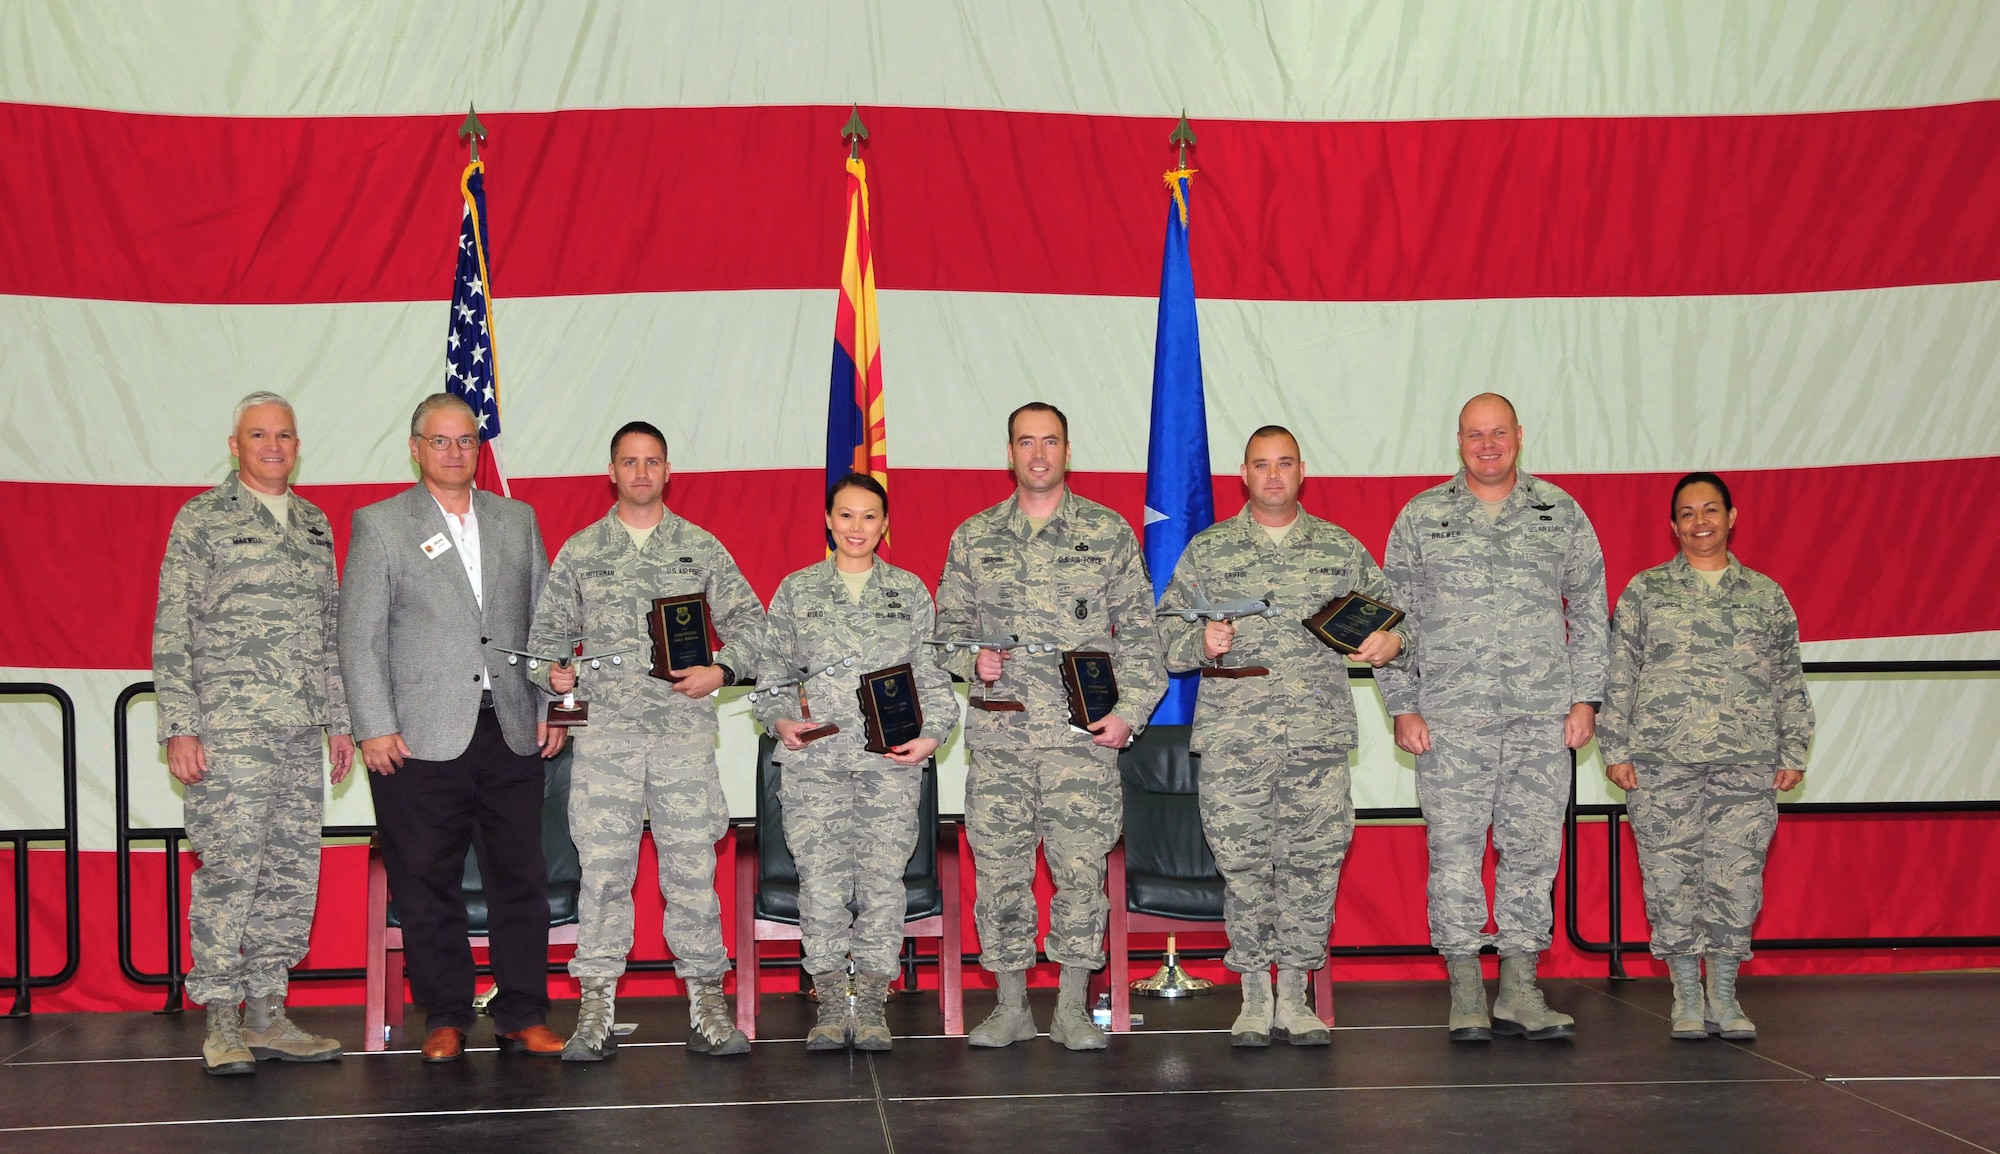 The 161st Air Refueling Wing, Phoenix Air National Guard Base, held its annual awards ceremony March 8.  The ceremony recognized the Outstanding Airmen of the year. From left, U.S. Air Force Brig. Gen. Edward Maxwell, commander of the Arizona Air National Guard; Mr. Dean Butler, president of the Phoenix Air National Guard Patriots; Senior Airman Justin Klosterman, Airman of the Year; Tech. Sgt. Cherry Rose Ayulo, junior noncommissioned officer of the year; Master Sgt. James Swanson, senior noncommissioned officer of the year; Staff Sgt. David Griffin, command chief award recipient; Colonel Gary Brewer, commander of the 161st Air Refueling Wing and Chief Master Sergeant Martha Garcia, 161st Air Refueling Wing command chief. (U. S. Air National Guard photo by Master Sgt. Kelly M. Deitloff)